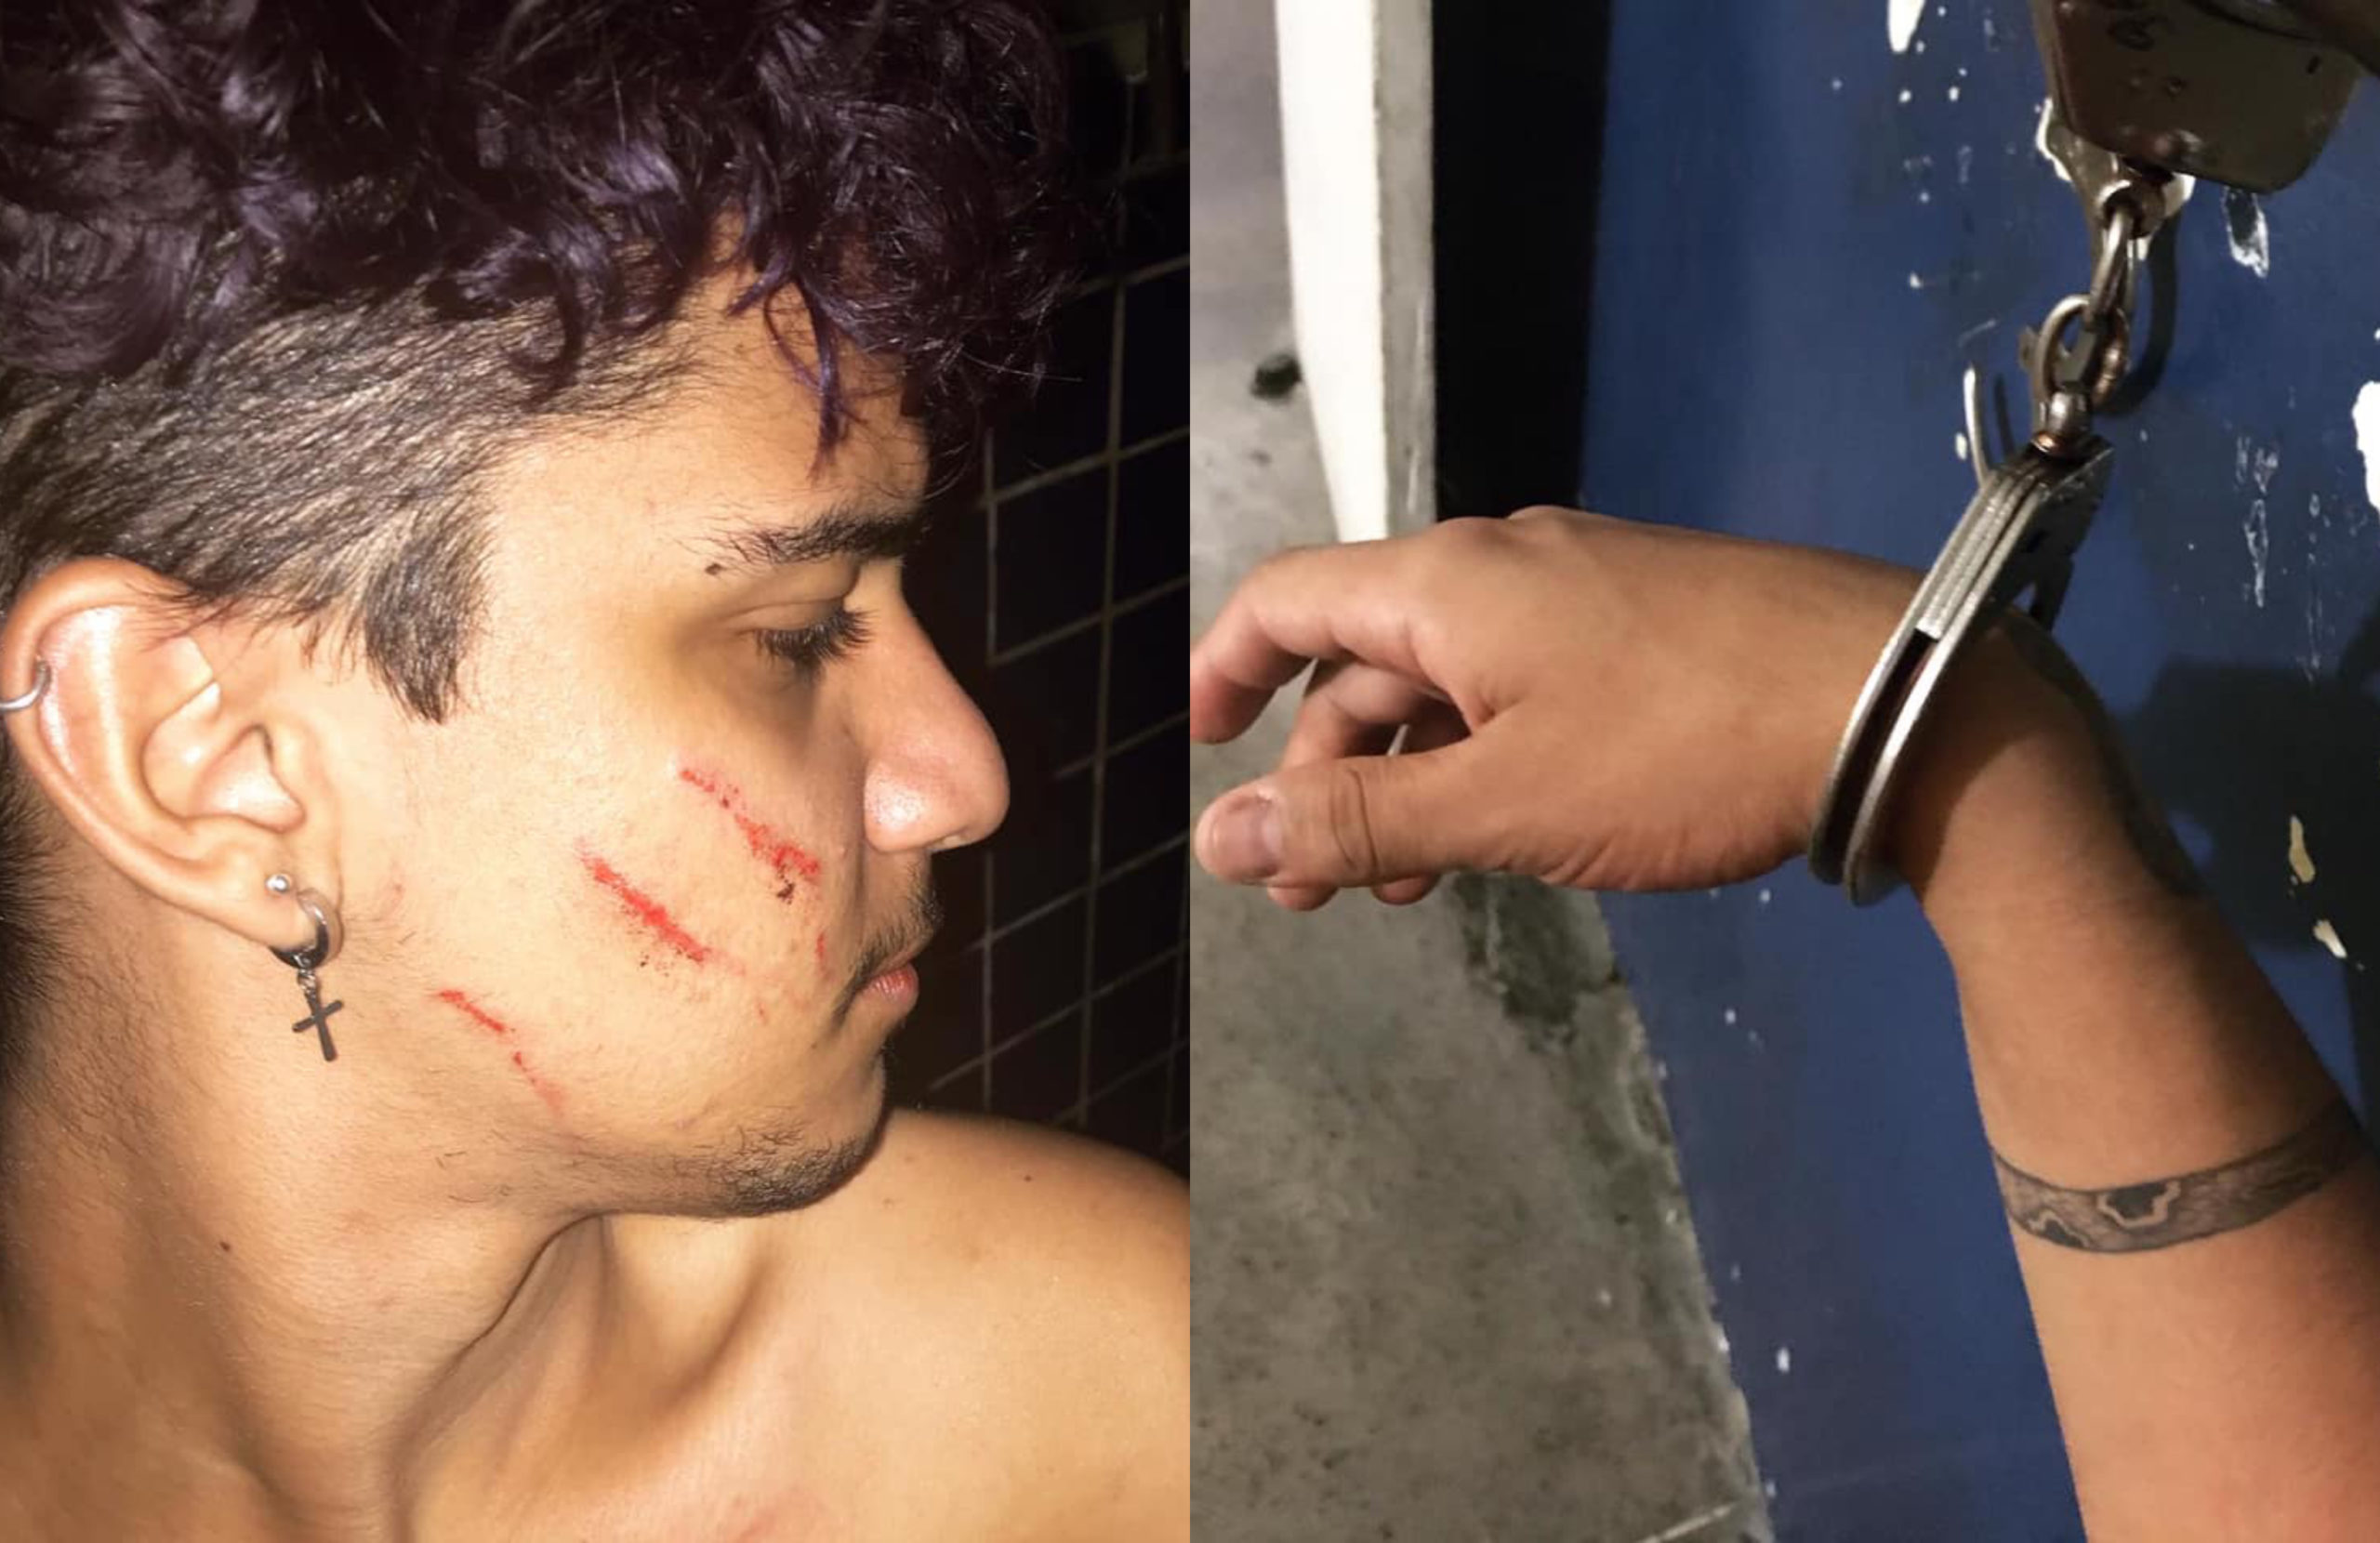 Lorran Oliveira, a 21-year-old photographer, was beaten with a broomstick by a neighbour. (Facebook)